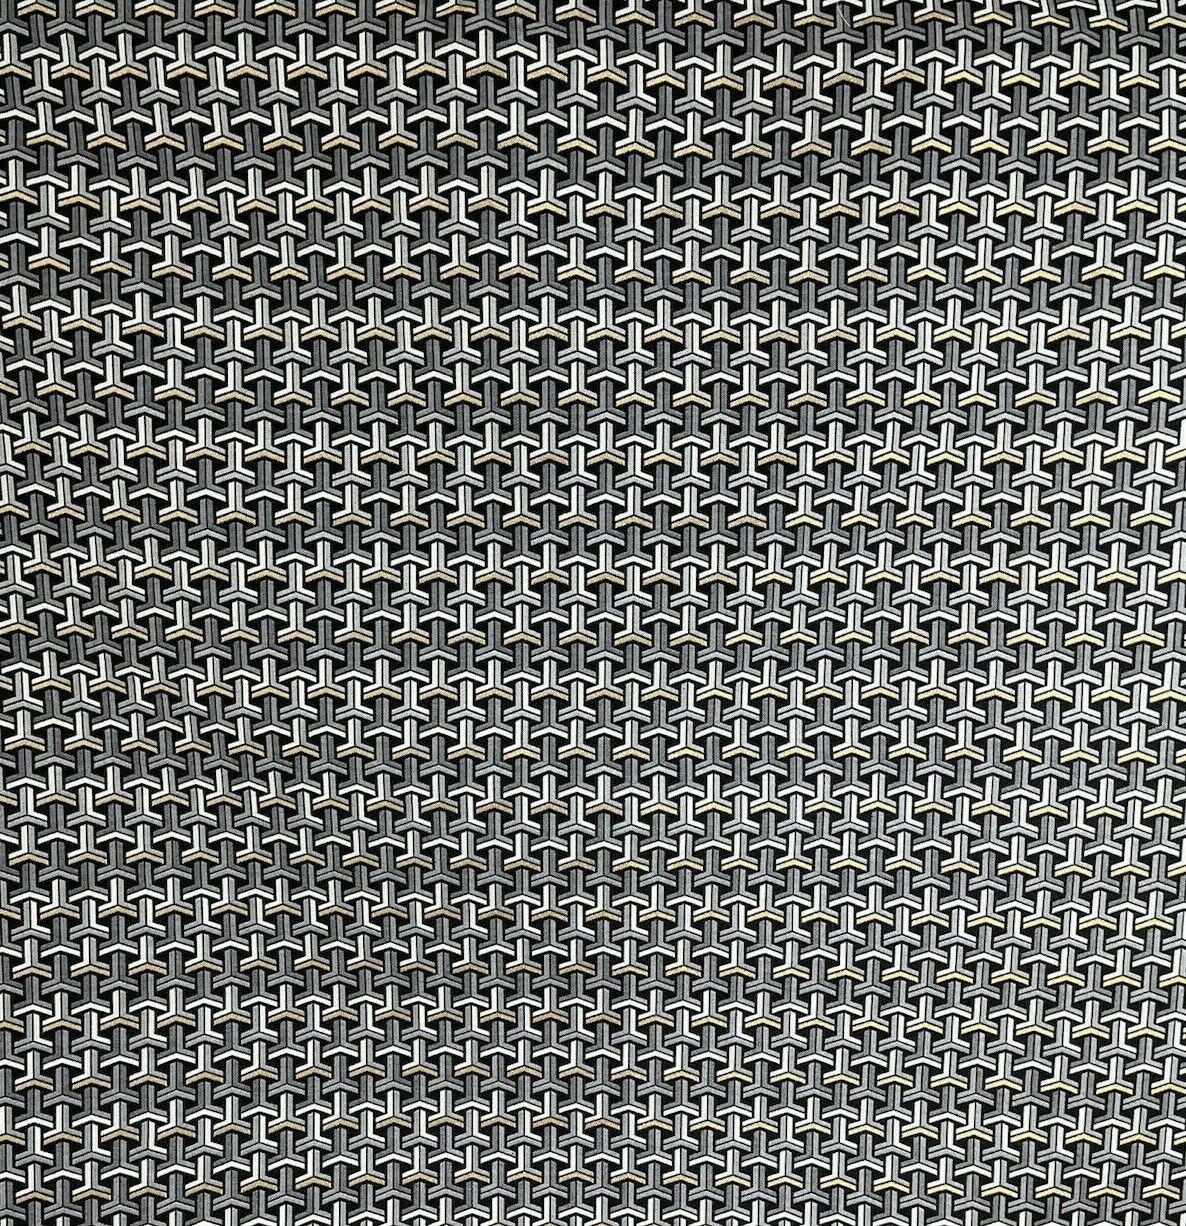 Art Deco Woven Fabric by Meter Black and White Upholstery Sewing Material Gold Brocade Textile